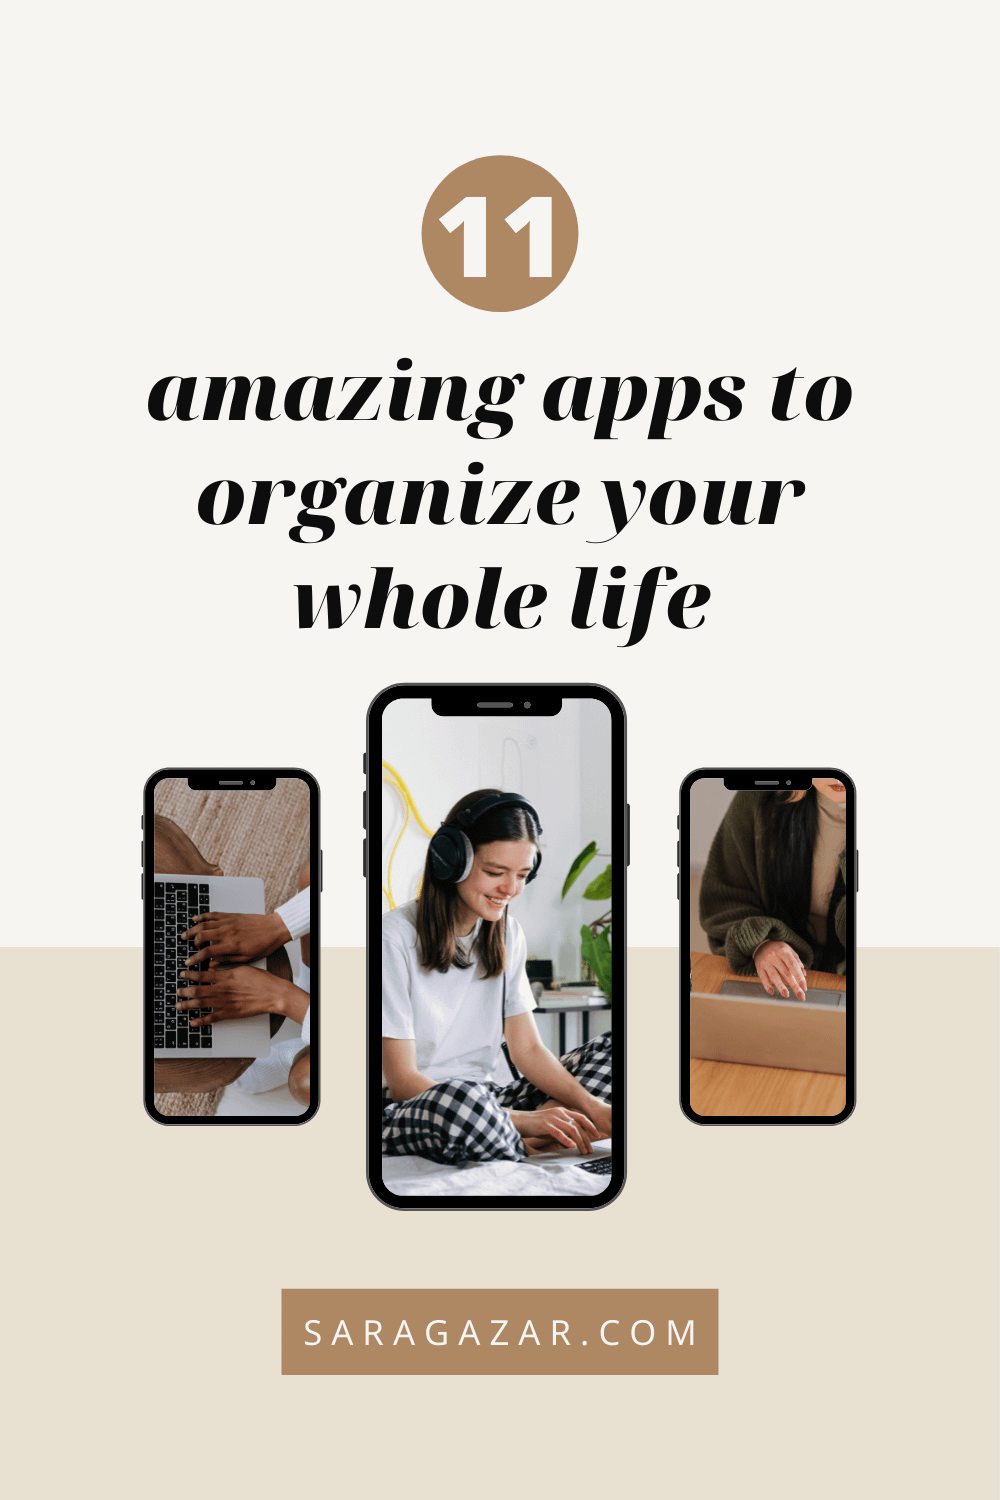 11 amazing apps to organize your life